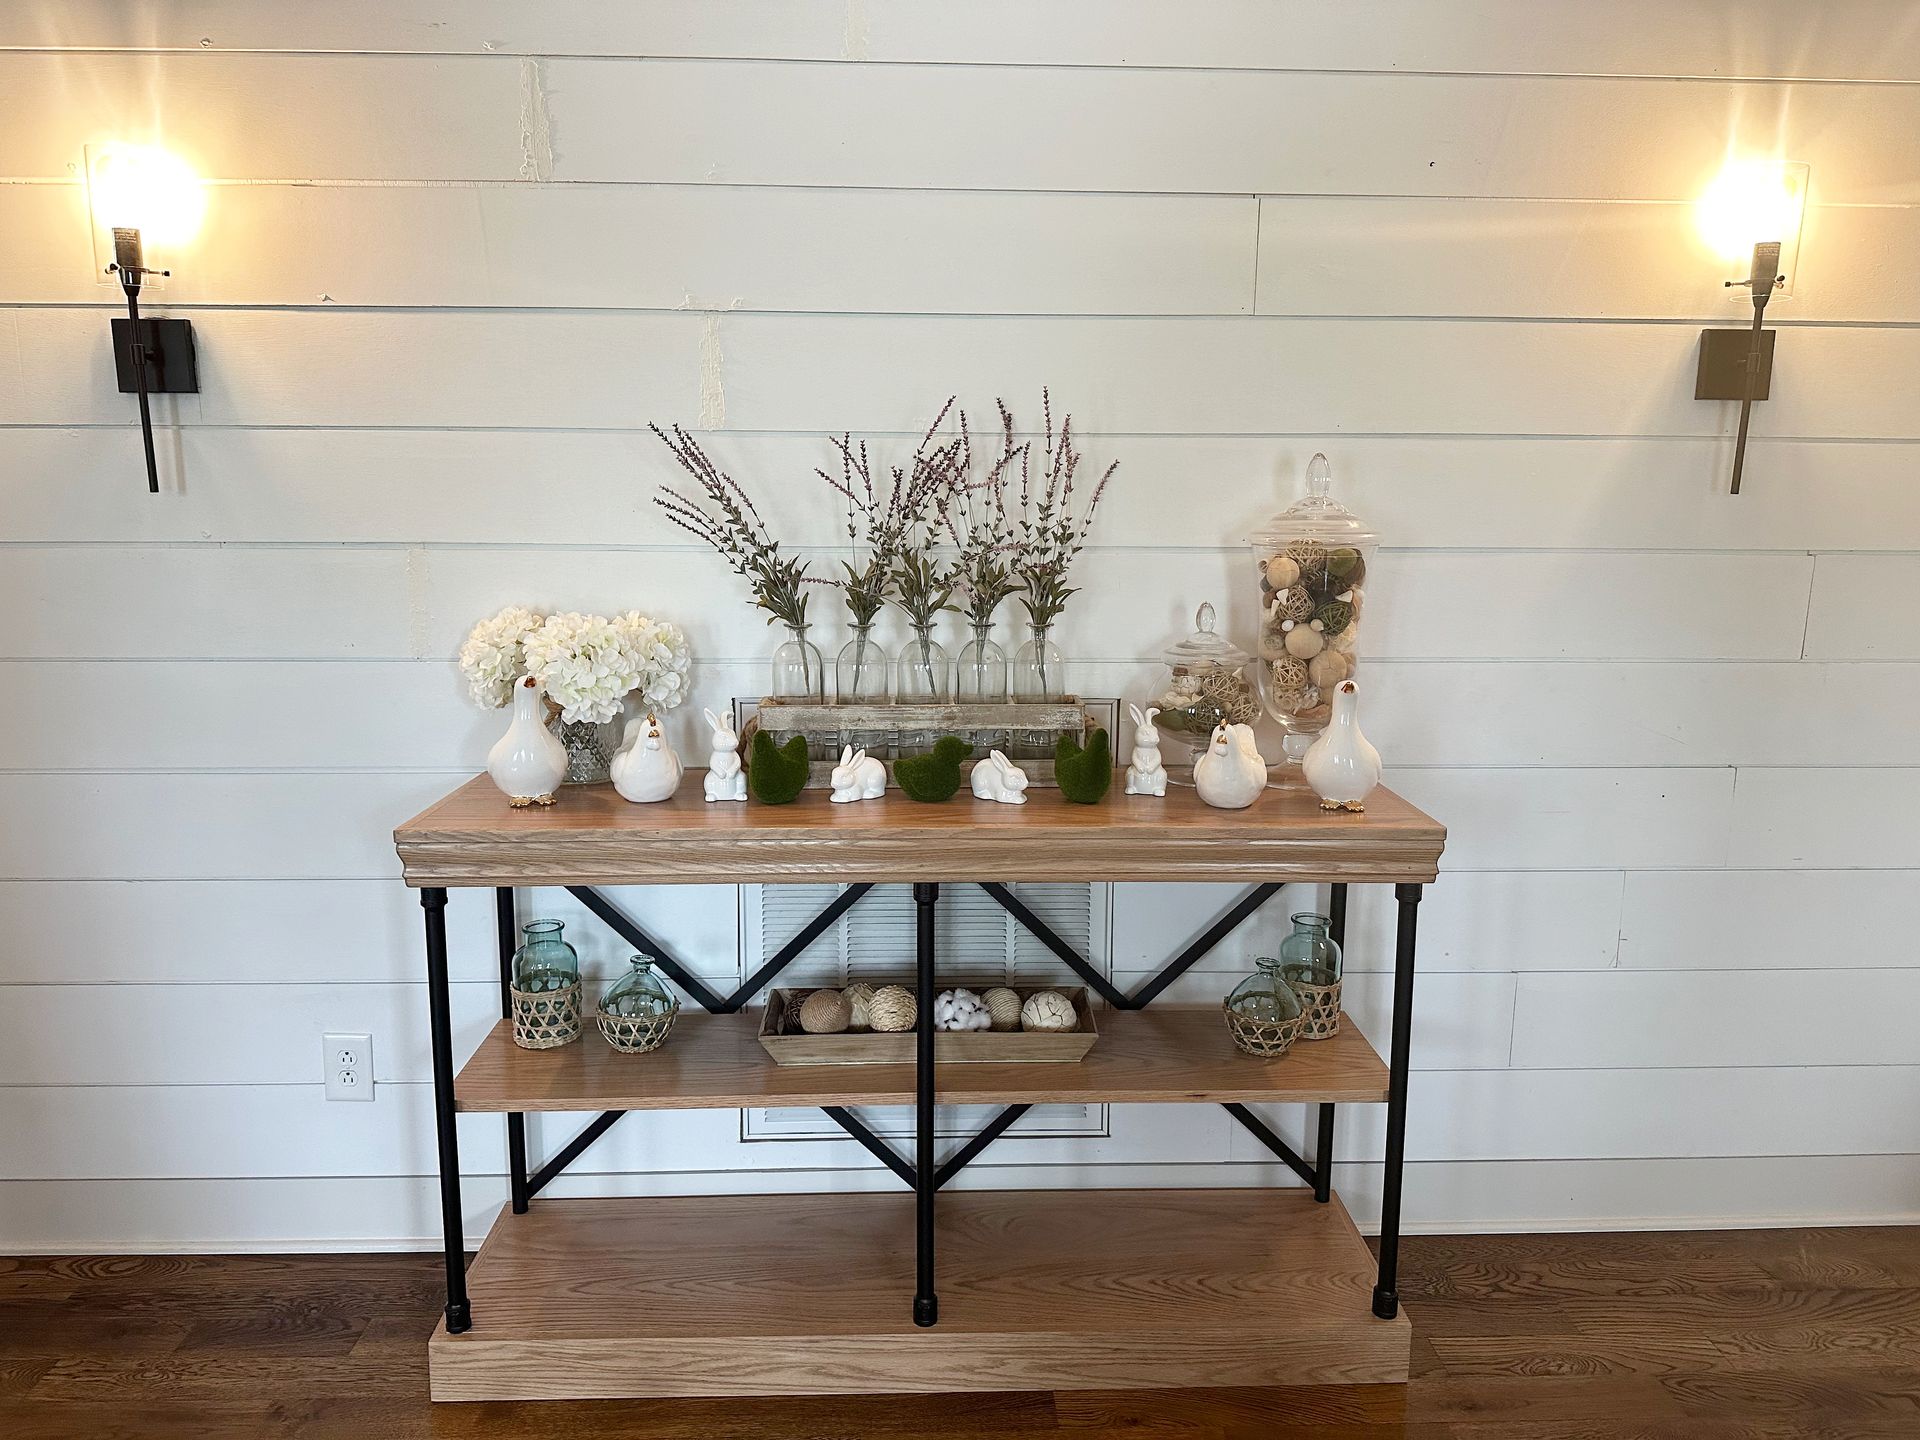 A wooden table with flowers and vases on it in a room.